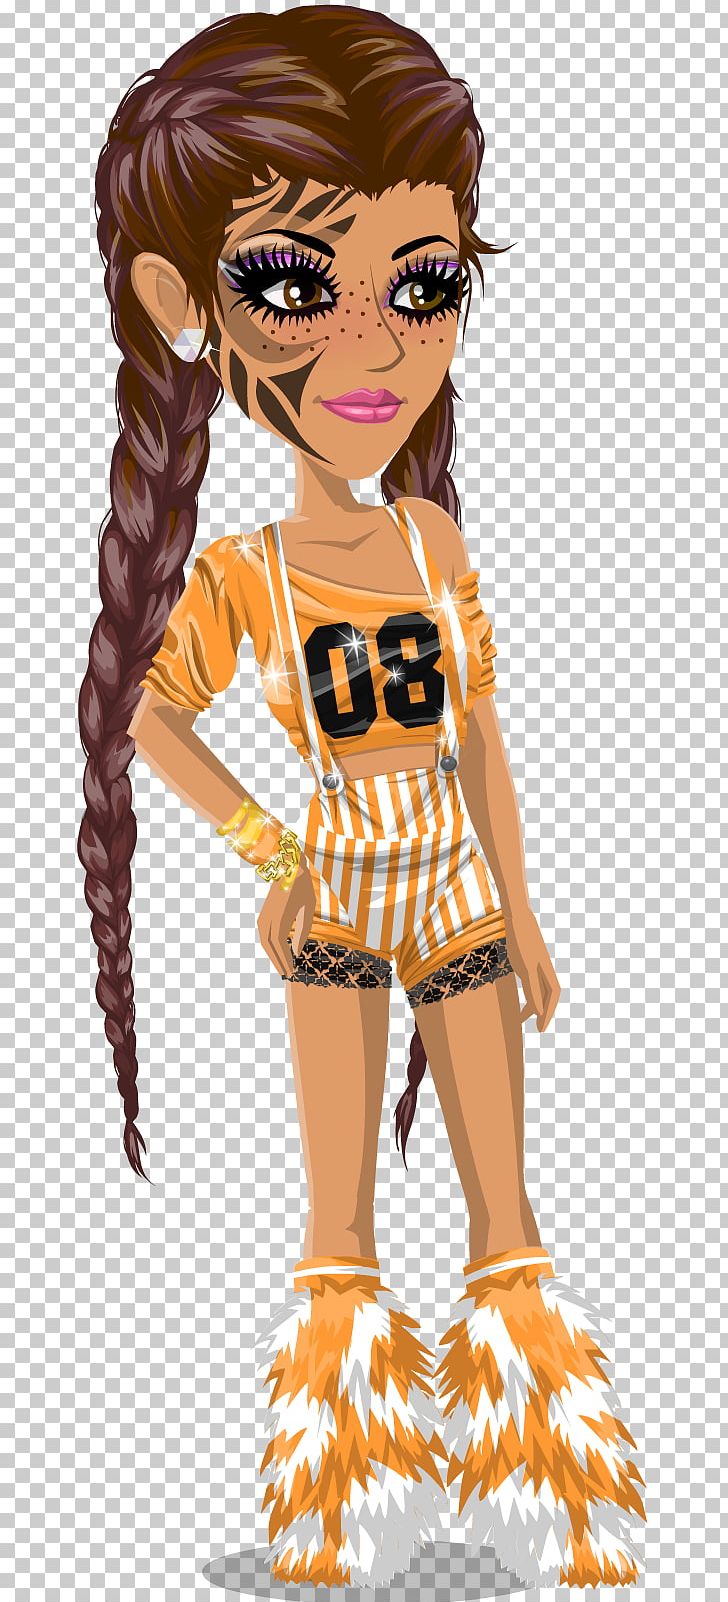 MovieStarPlanet Thepix Game Android PNG, Clipart, Android, Art, Avatar, Avatar 3, Avatar Series Free PNG Download